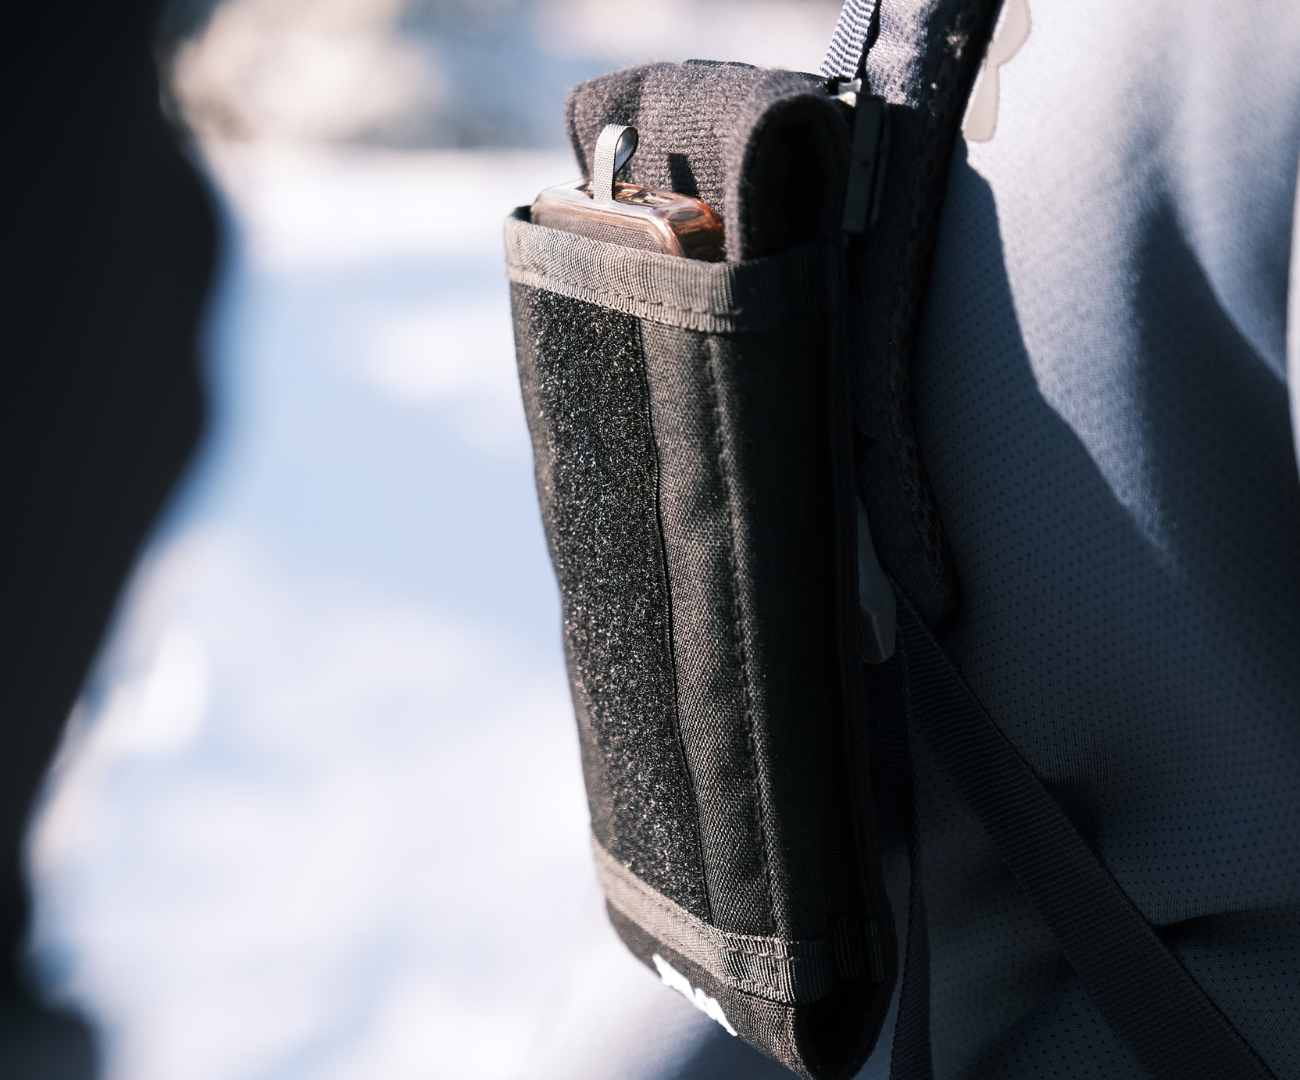 REELOQ Smartphone Pouch for Backpack